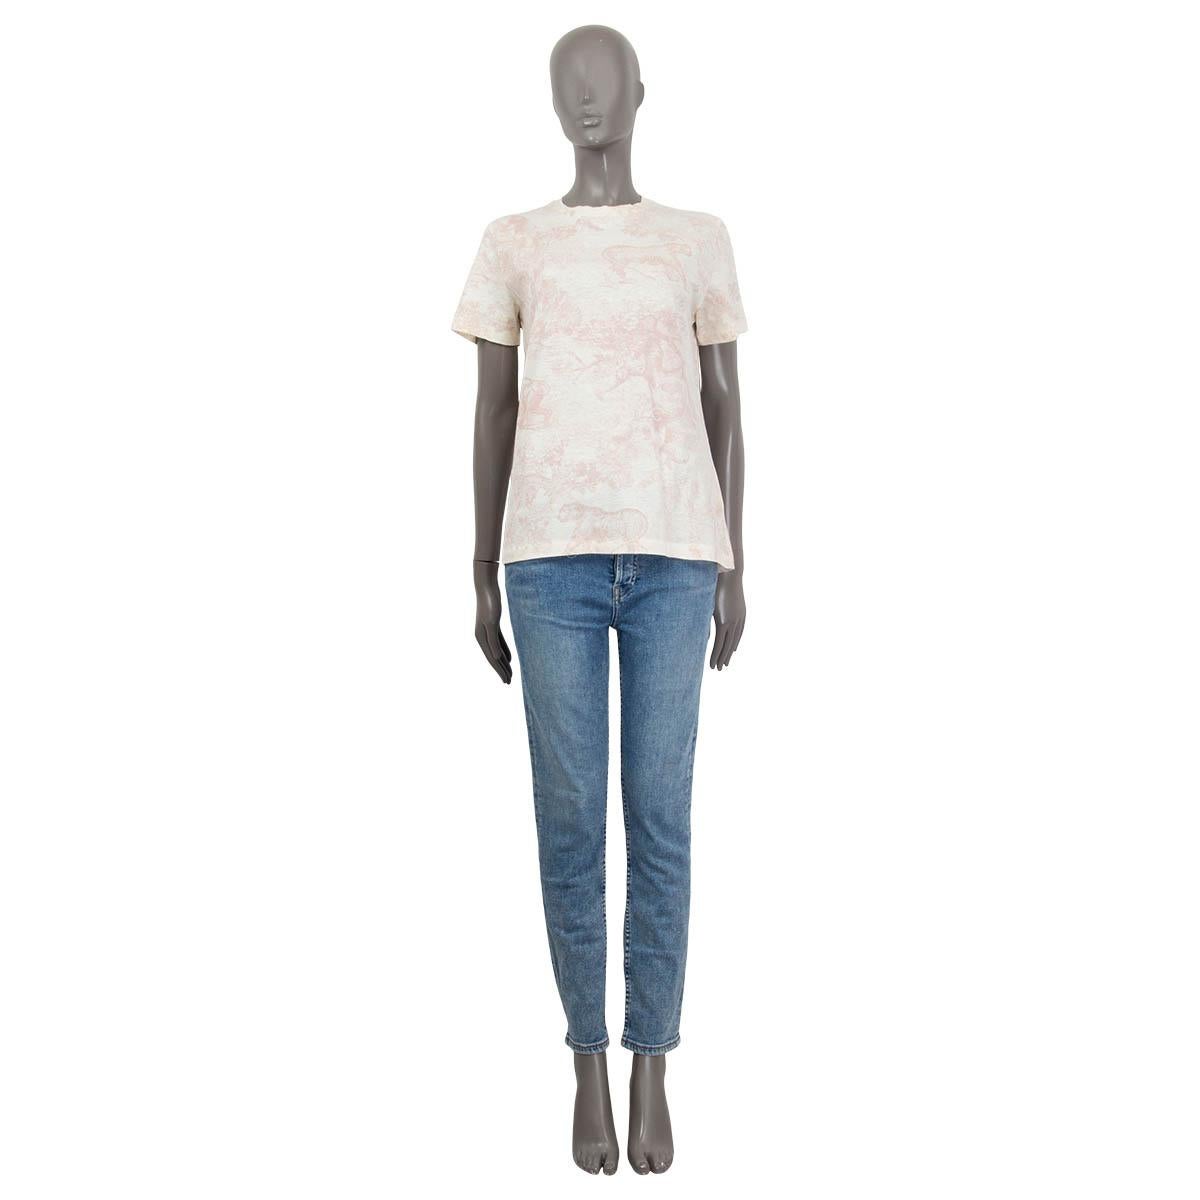 100% authentic Christian Dior Cruise 2019 Toile De Jouy t-shirt in beige and dusty rose cotton (86%) and linen (14%). Features short sleeves. Unlined. Has been worn and is in excellent condition. 

Measurements
Tag Size	S
Size	S
Shoulder Width	41cm